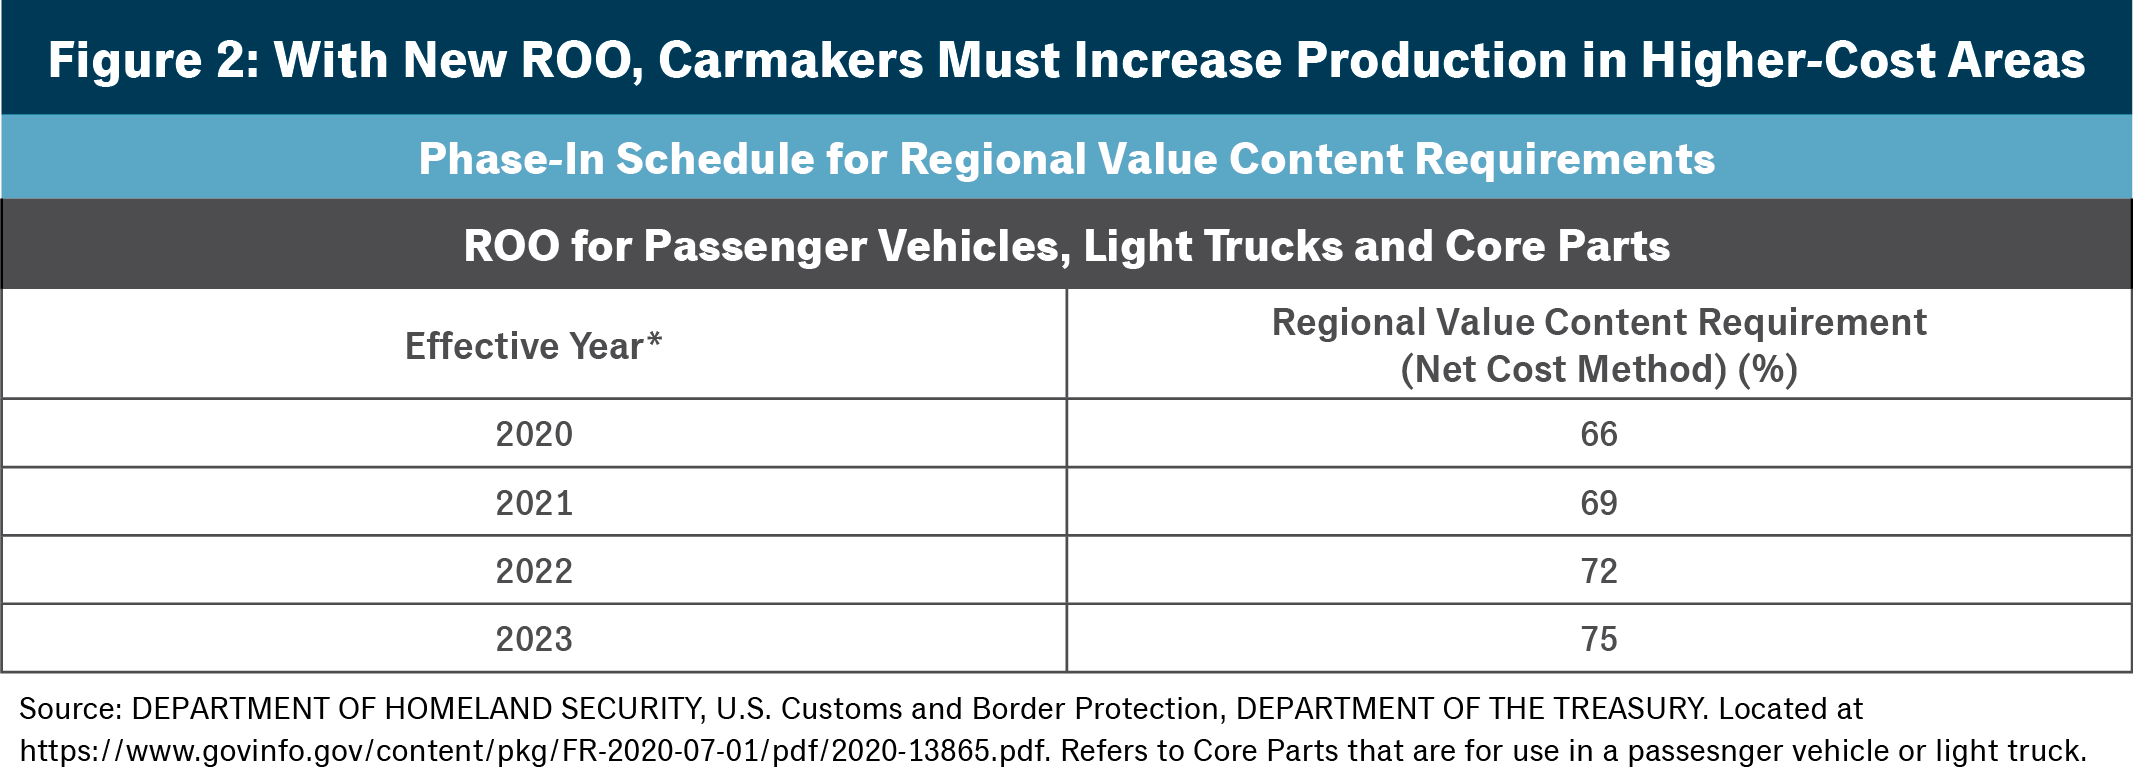 Figure 2: With New ROO, Carmakers Must Increase Production in Higher-Cost Areas